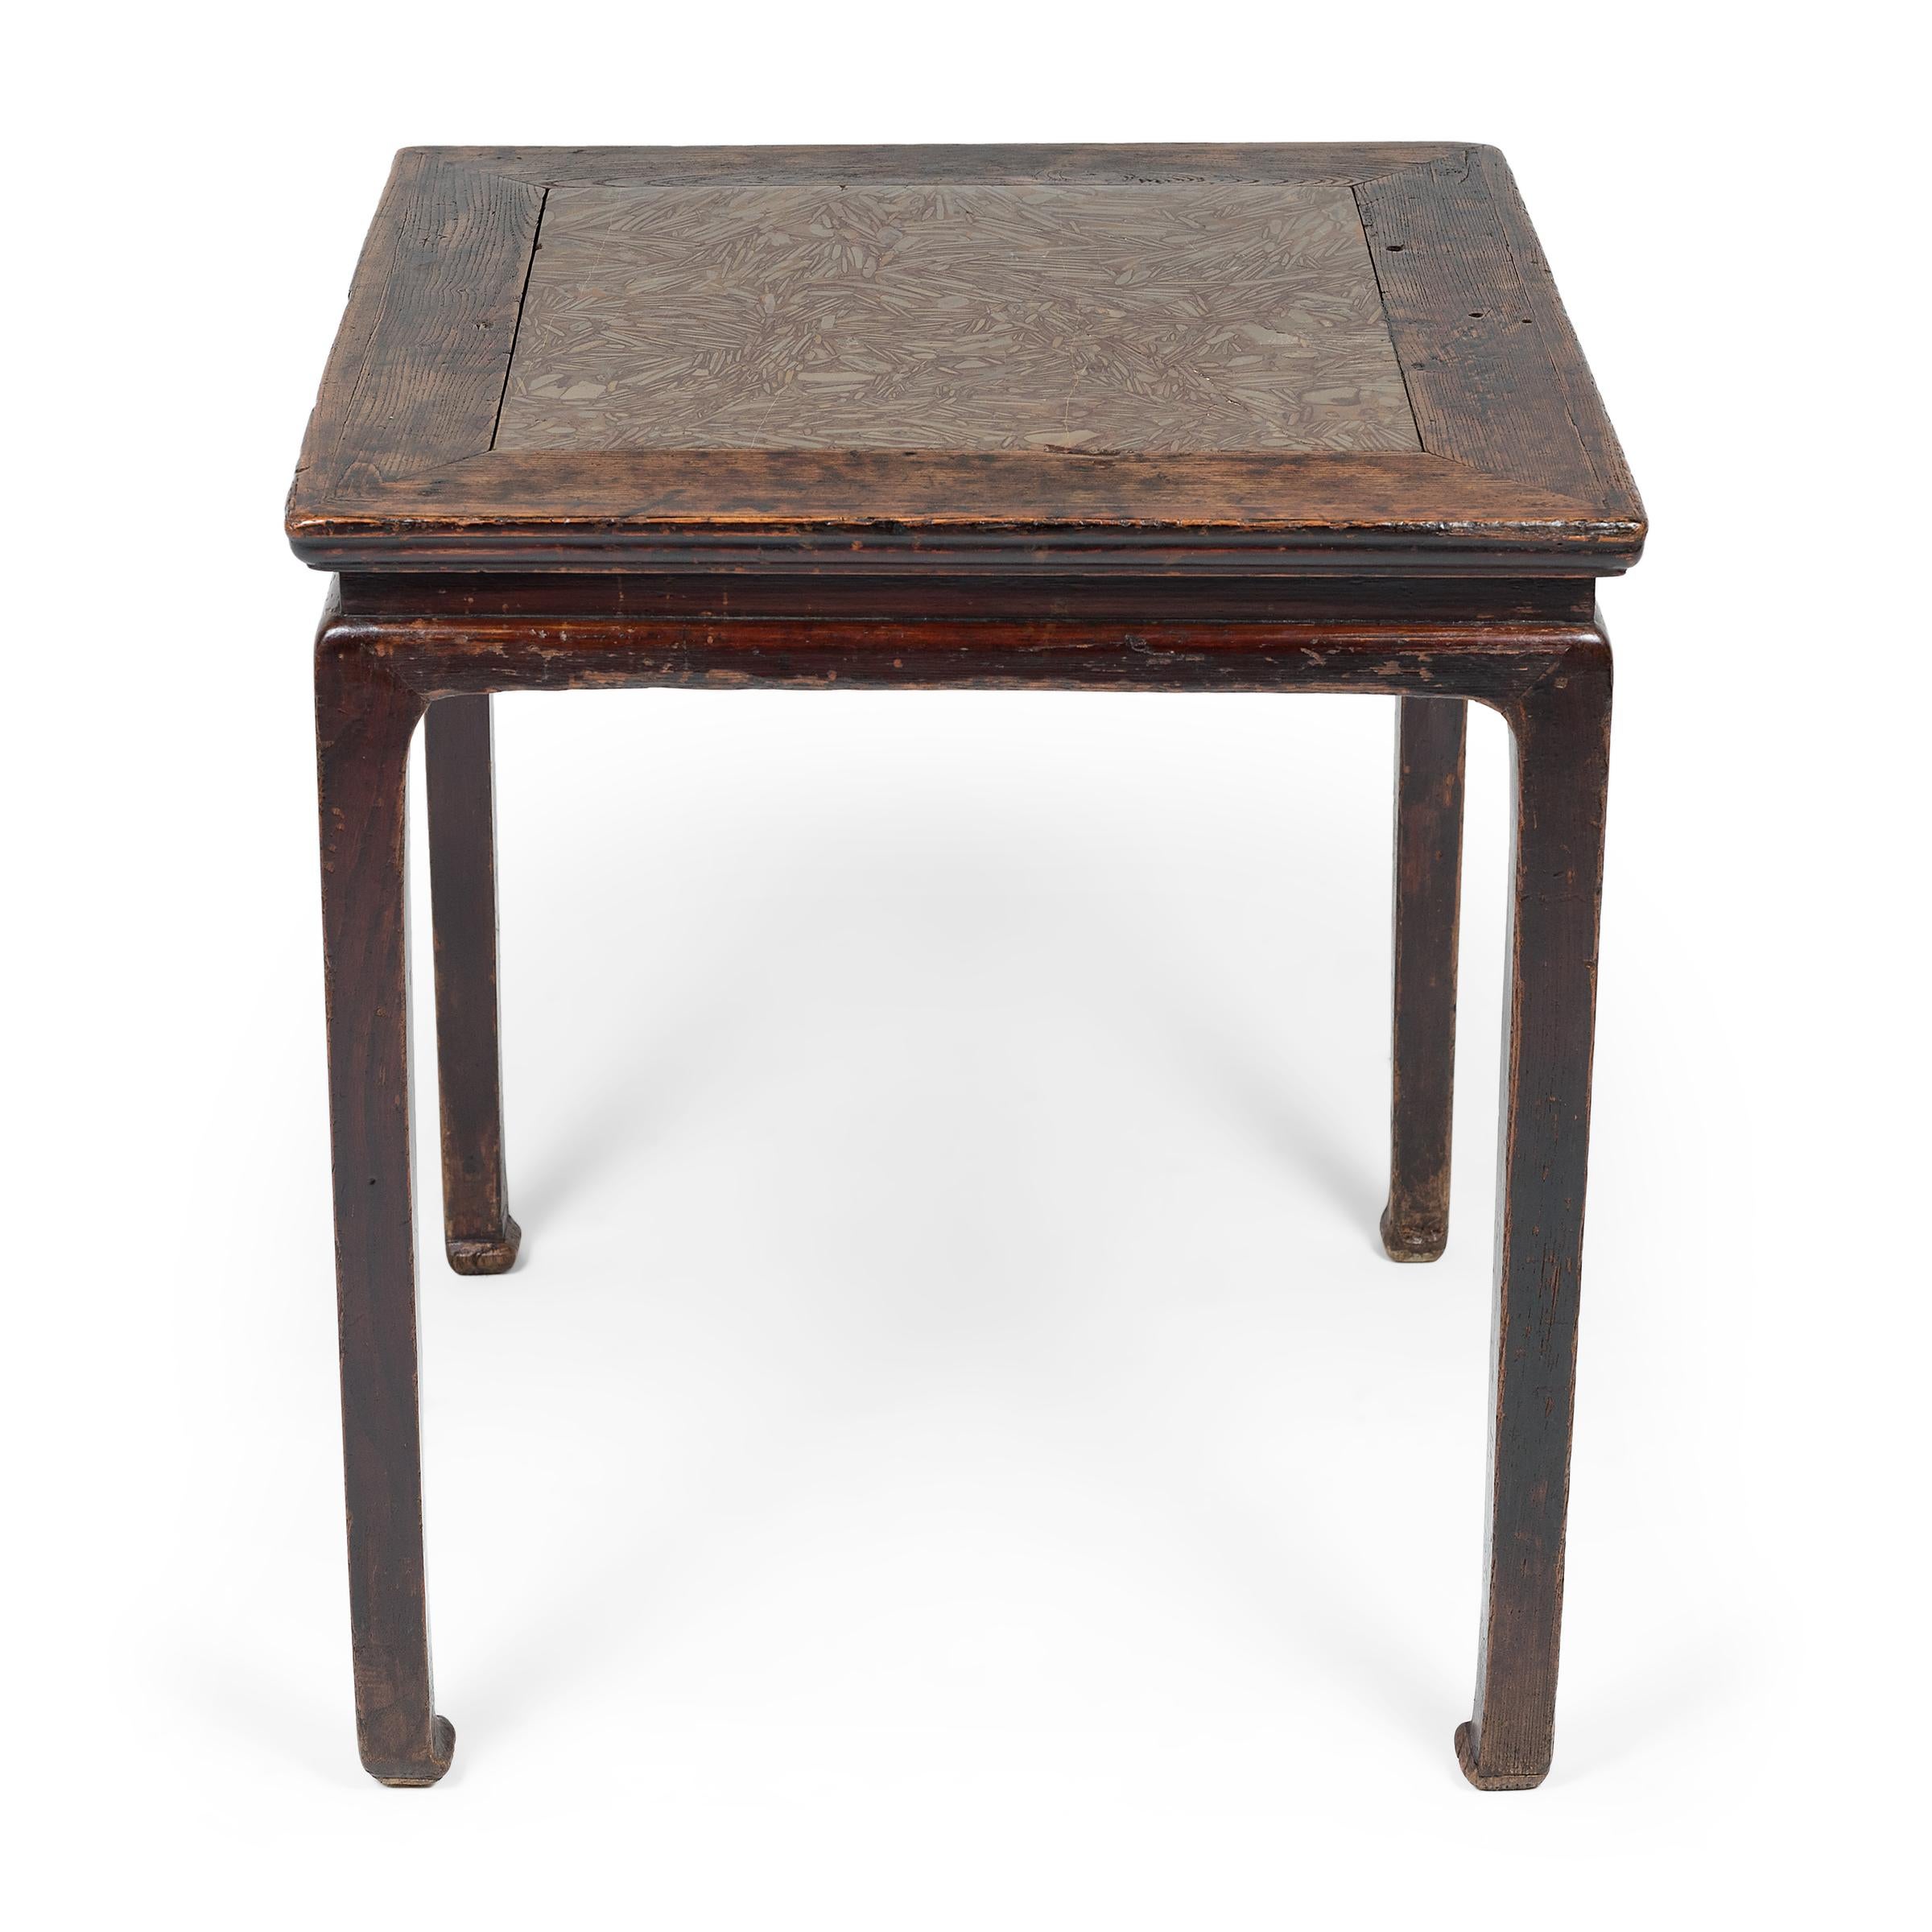 Chinese Puddingstone Top Game Table, c. 1850 In Good Condition For Sale In Chicago, IL